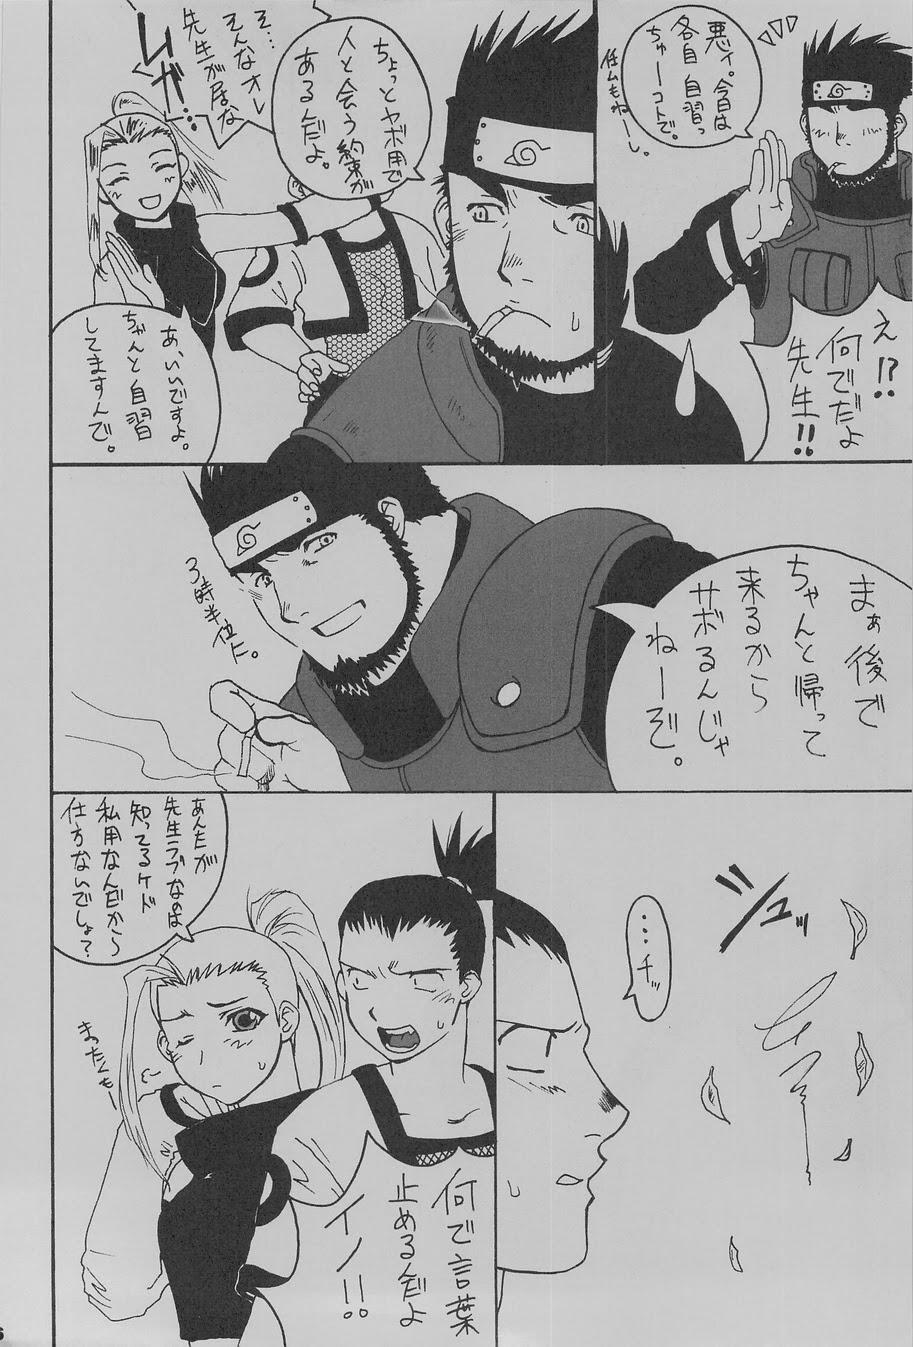 Bigass Ka - it happened in the distant past - Naruto Fullmetal alchemist Gunparade march Guyonshemale - Page 8